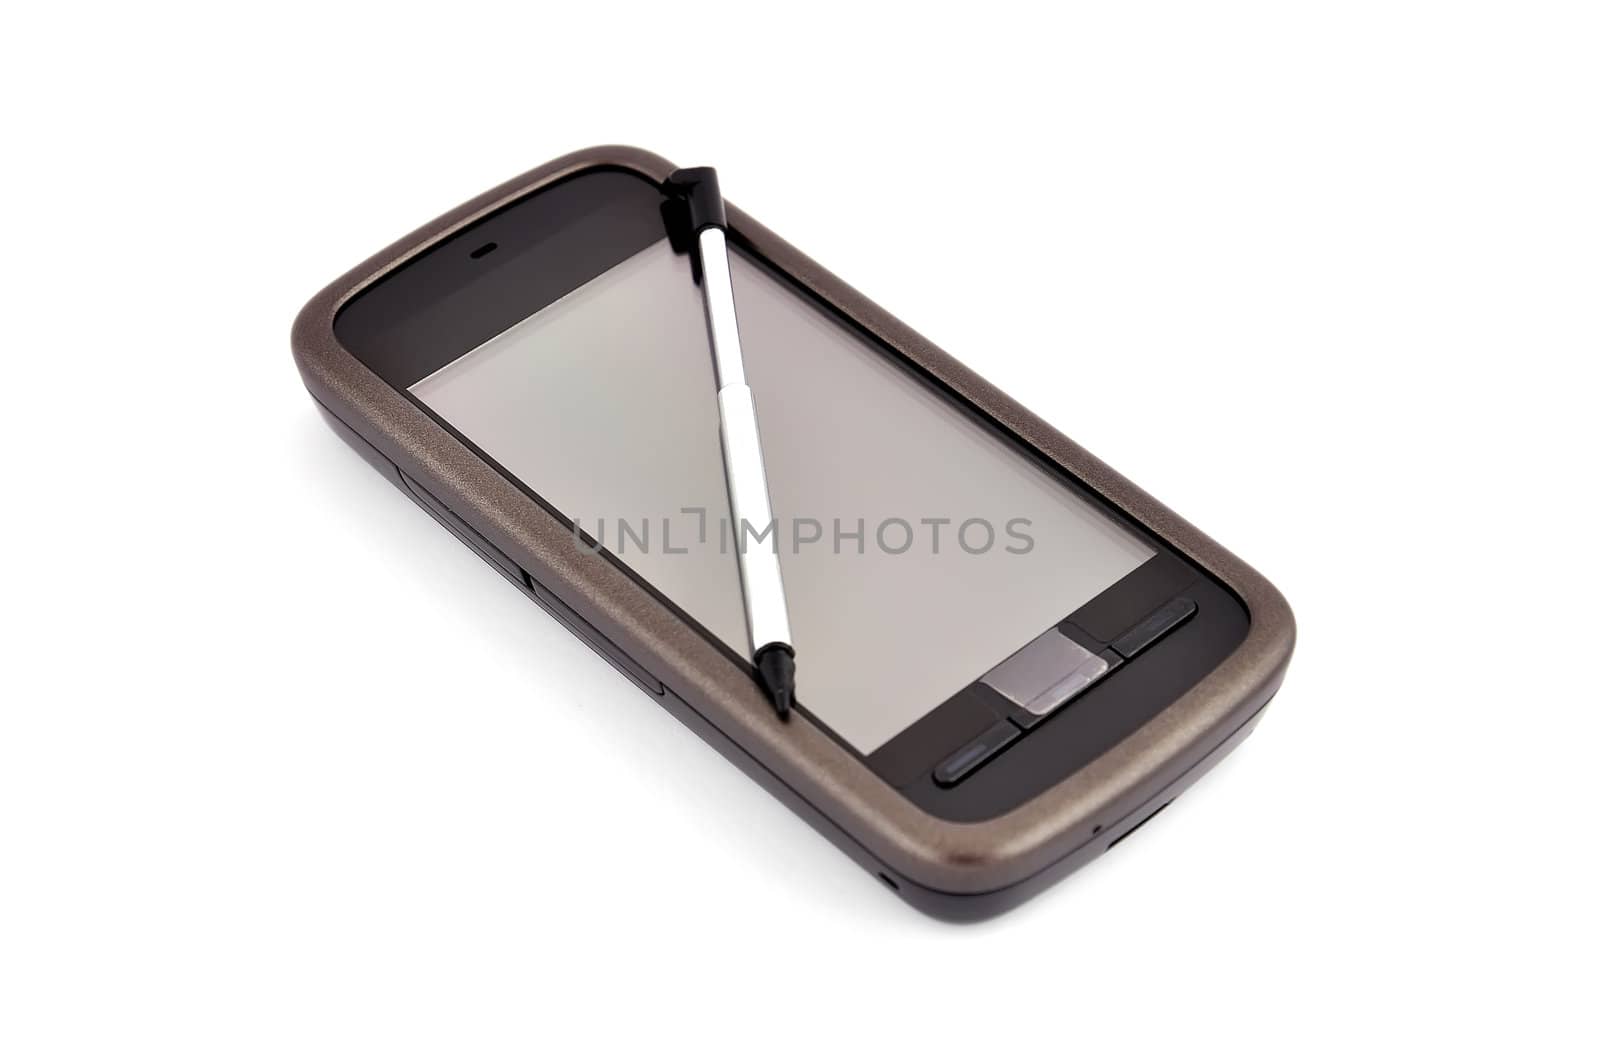 touchscreen mobile phone on white background